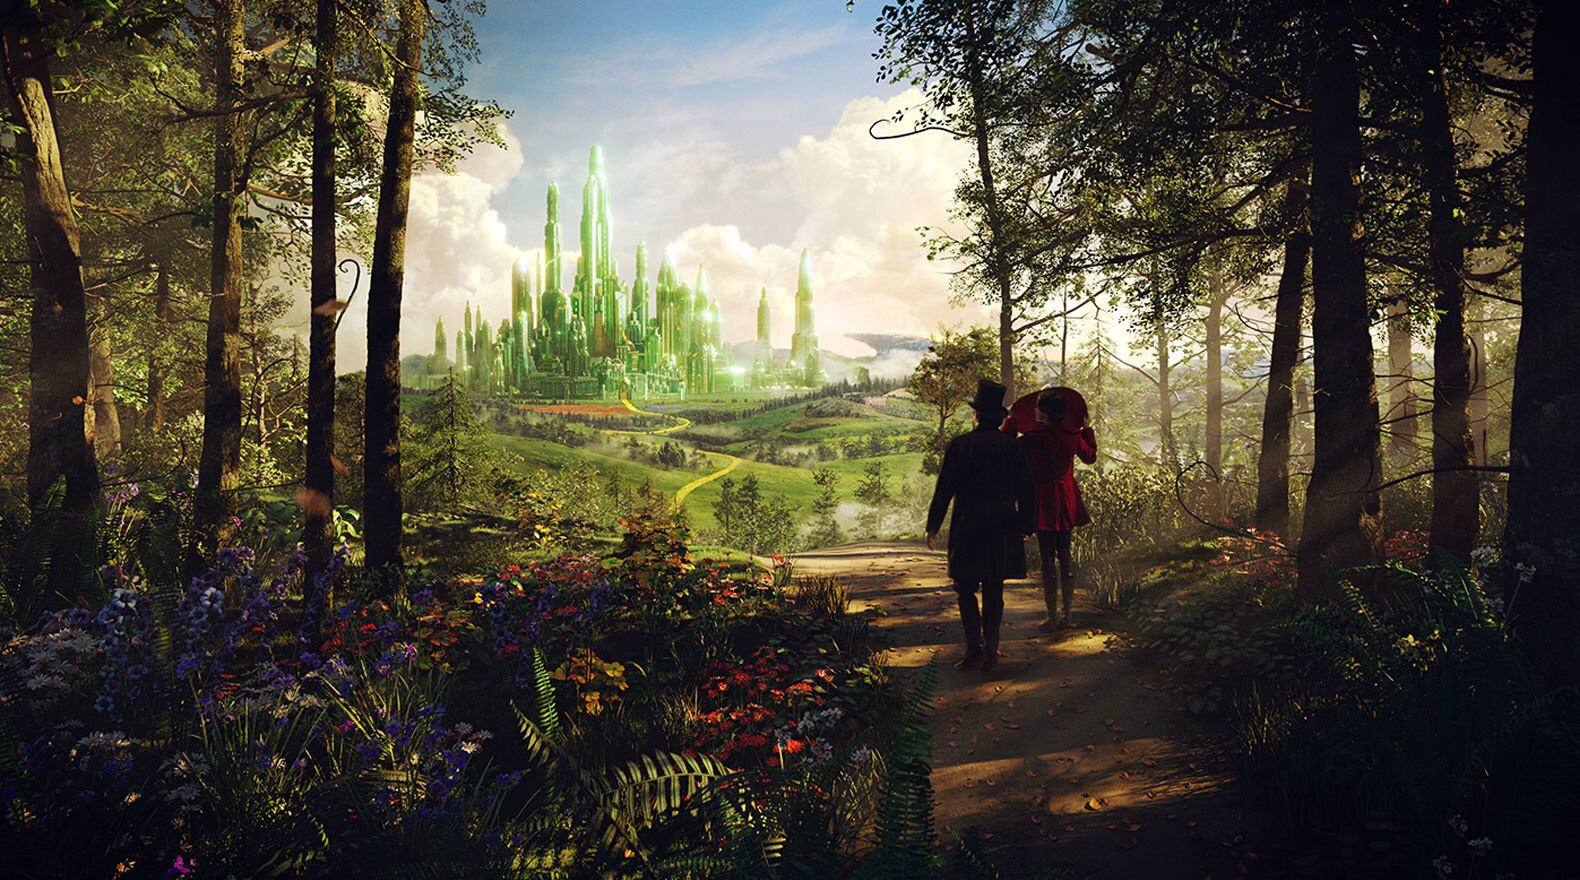 Mila Kunis and James Franco in "Oz the Great and Powerful"